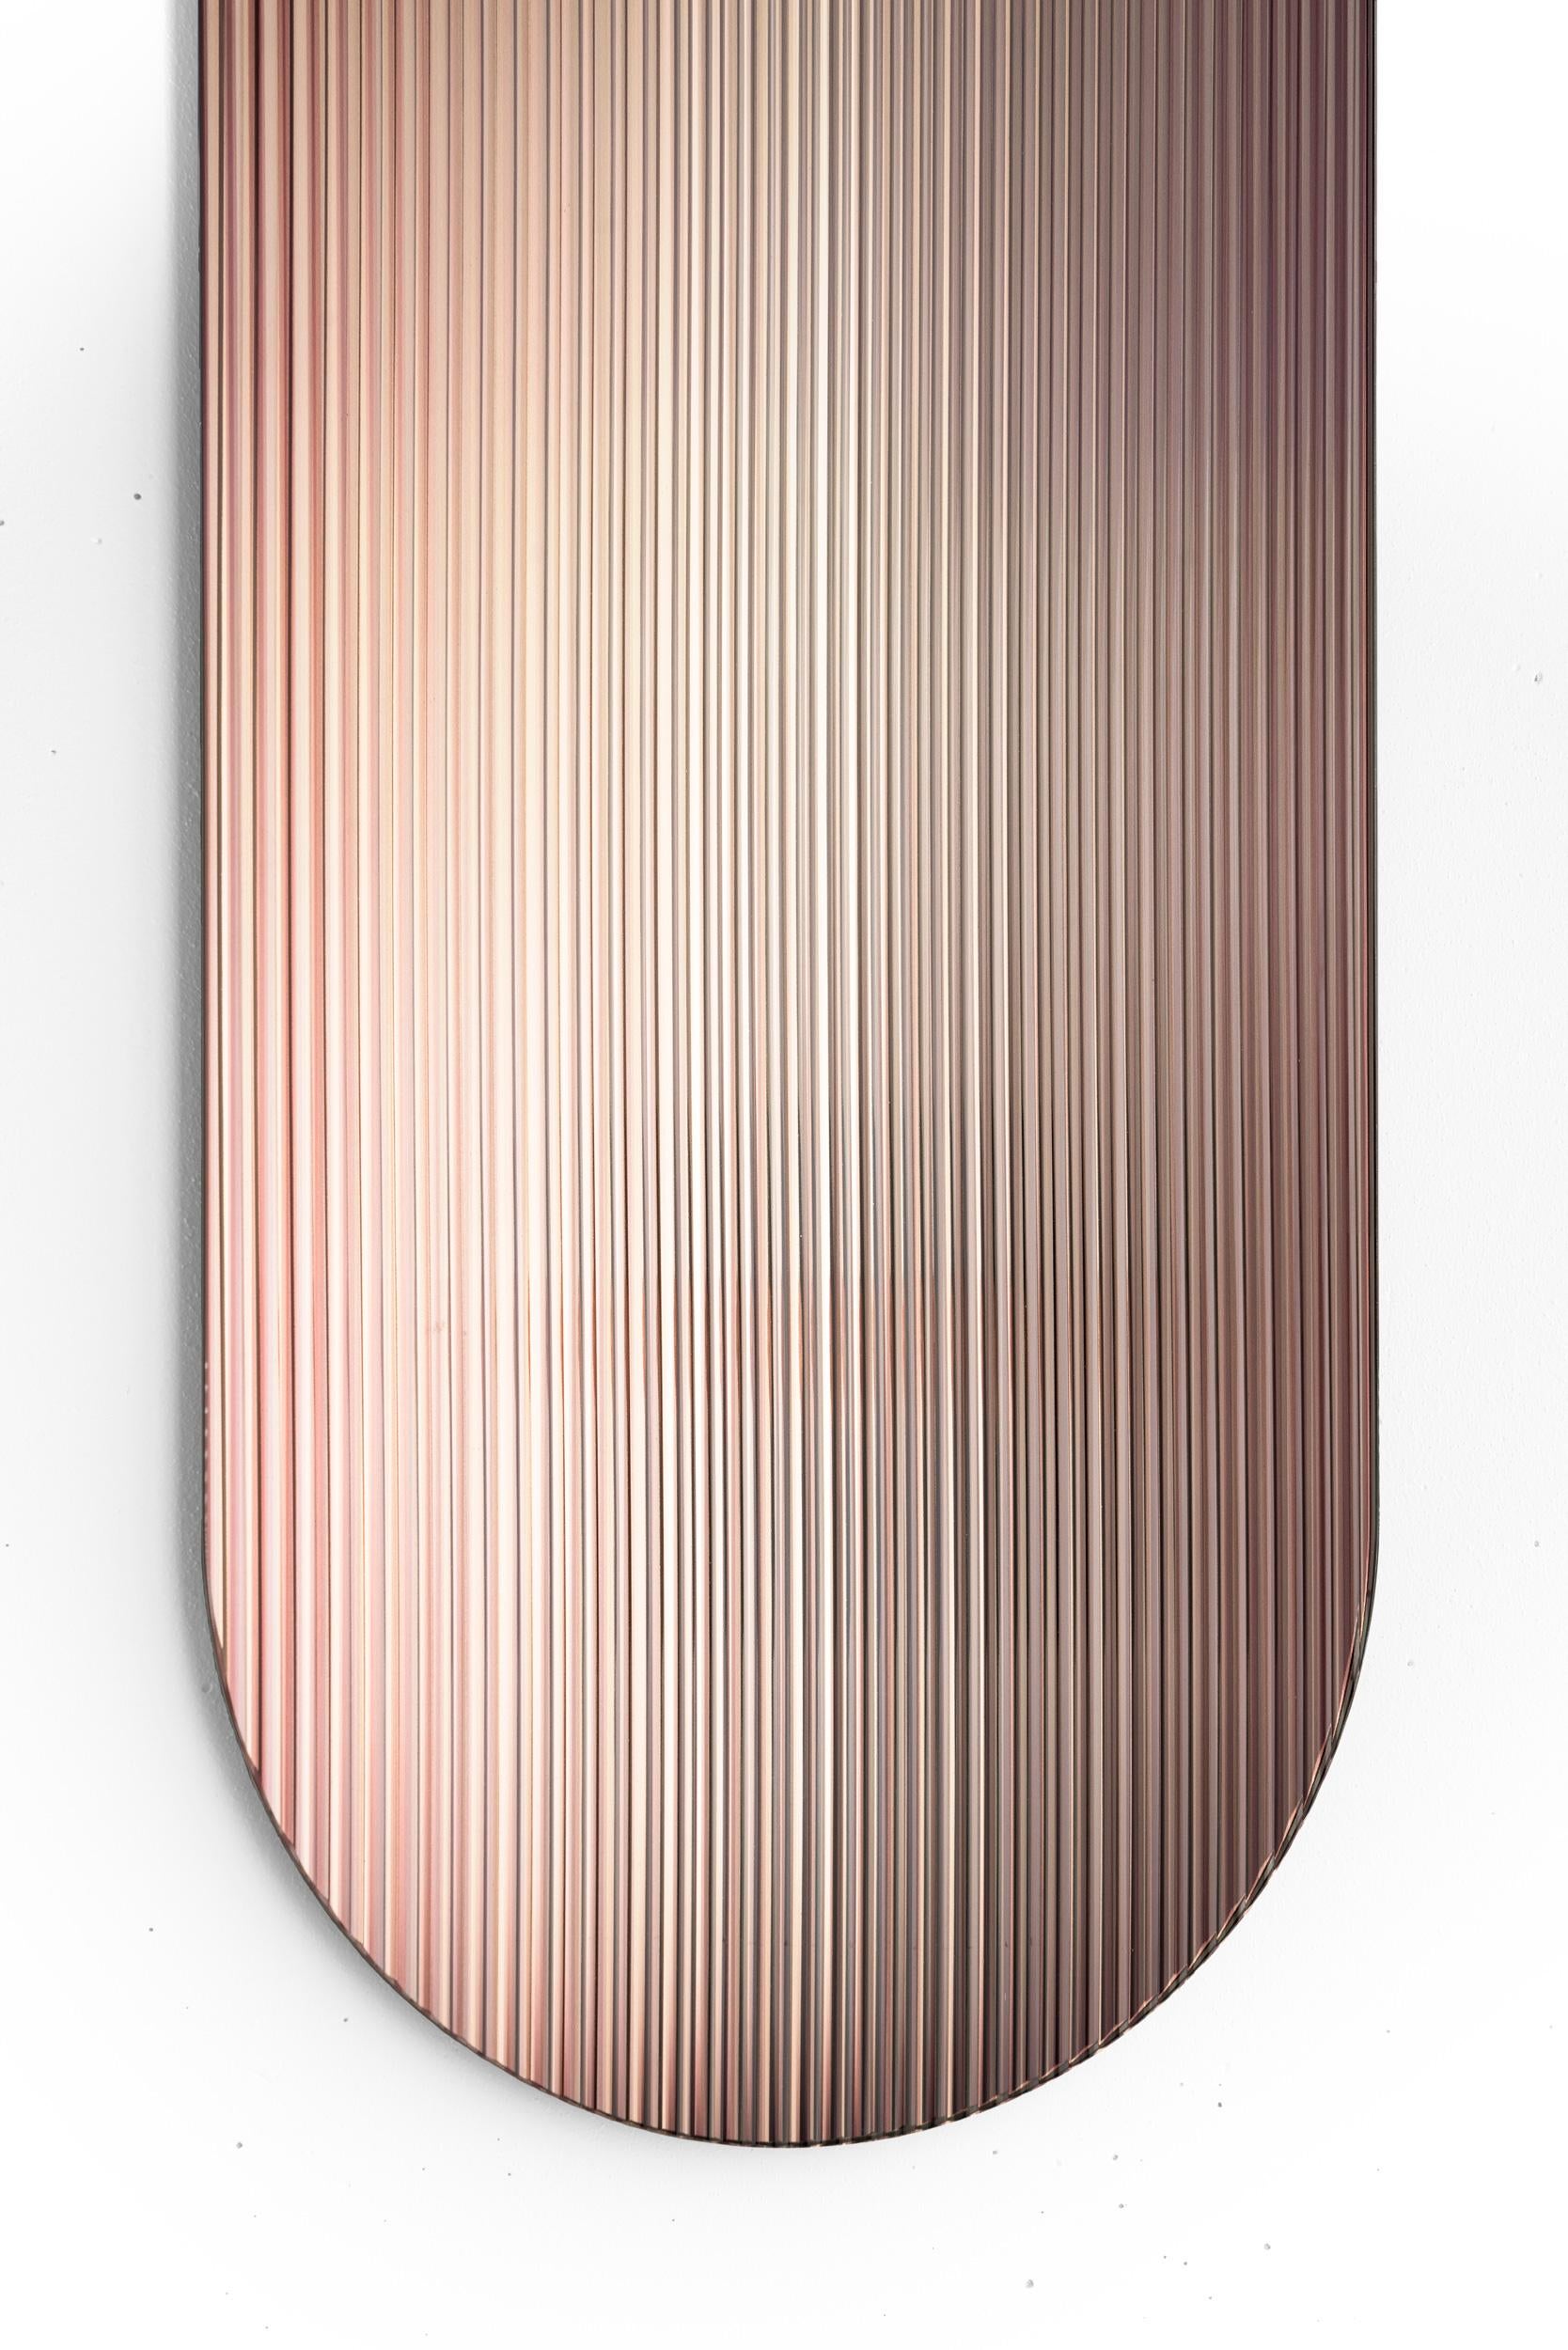 The reflective, coloured, rippled glass panel – designed to add a palette of colour to spaces – reflects light in spaces and adds movement and color whilst creating abstracted reflections. The piece disperses light through its rippled surface